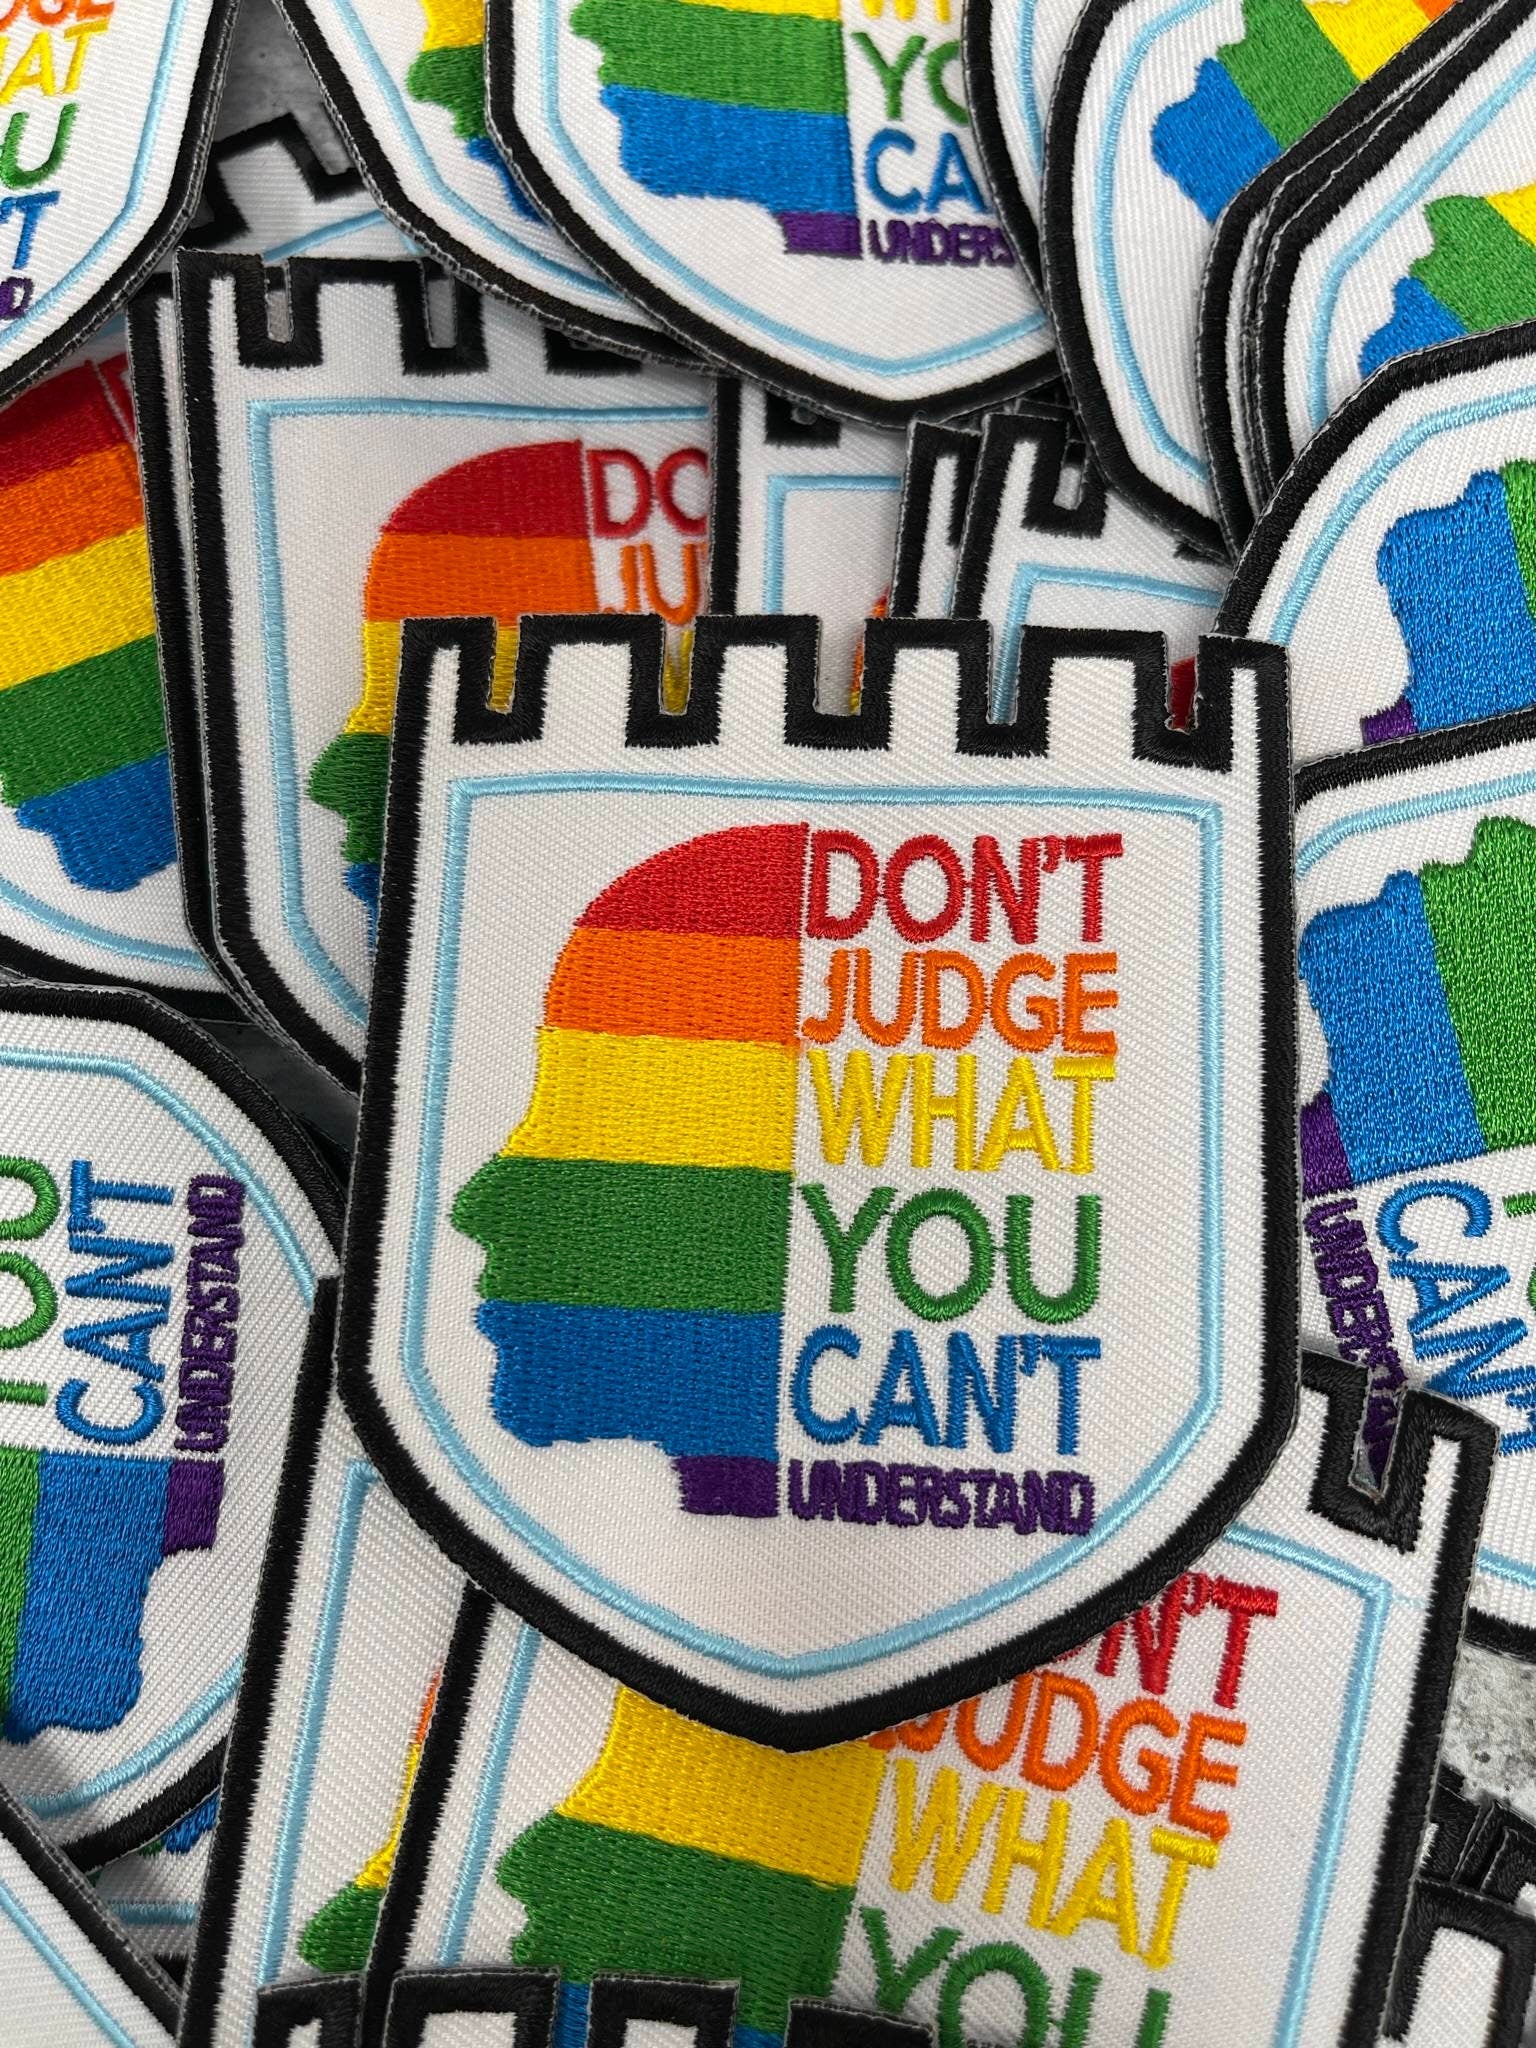 Pride Collection: 1-pc, "You Can't Judge", Sz 3.5" Embroidered Iron-on Patch/LGBTQ Patch for Jackets, Hats, Crocs, Bags, & More,Pride Gifts